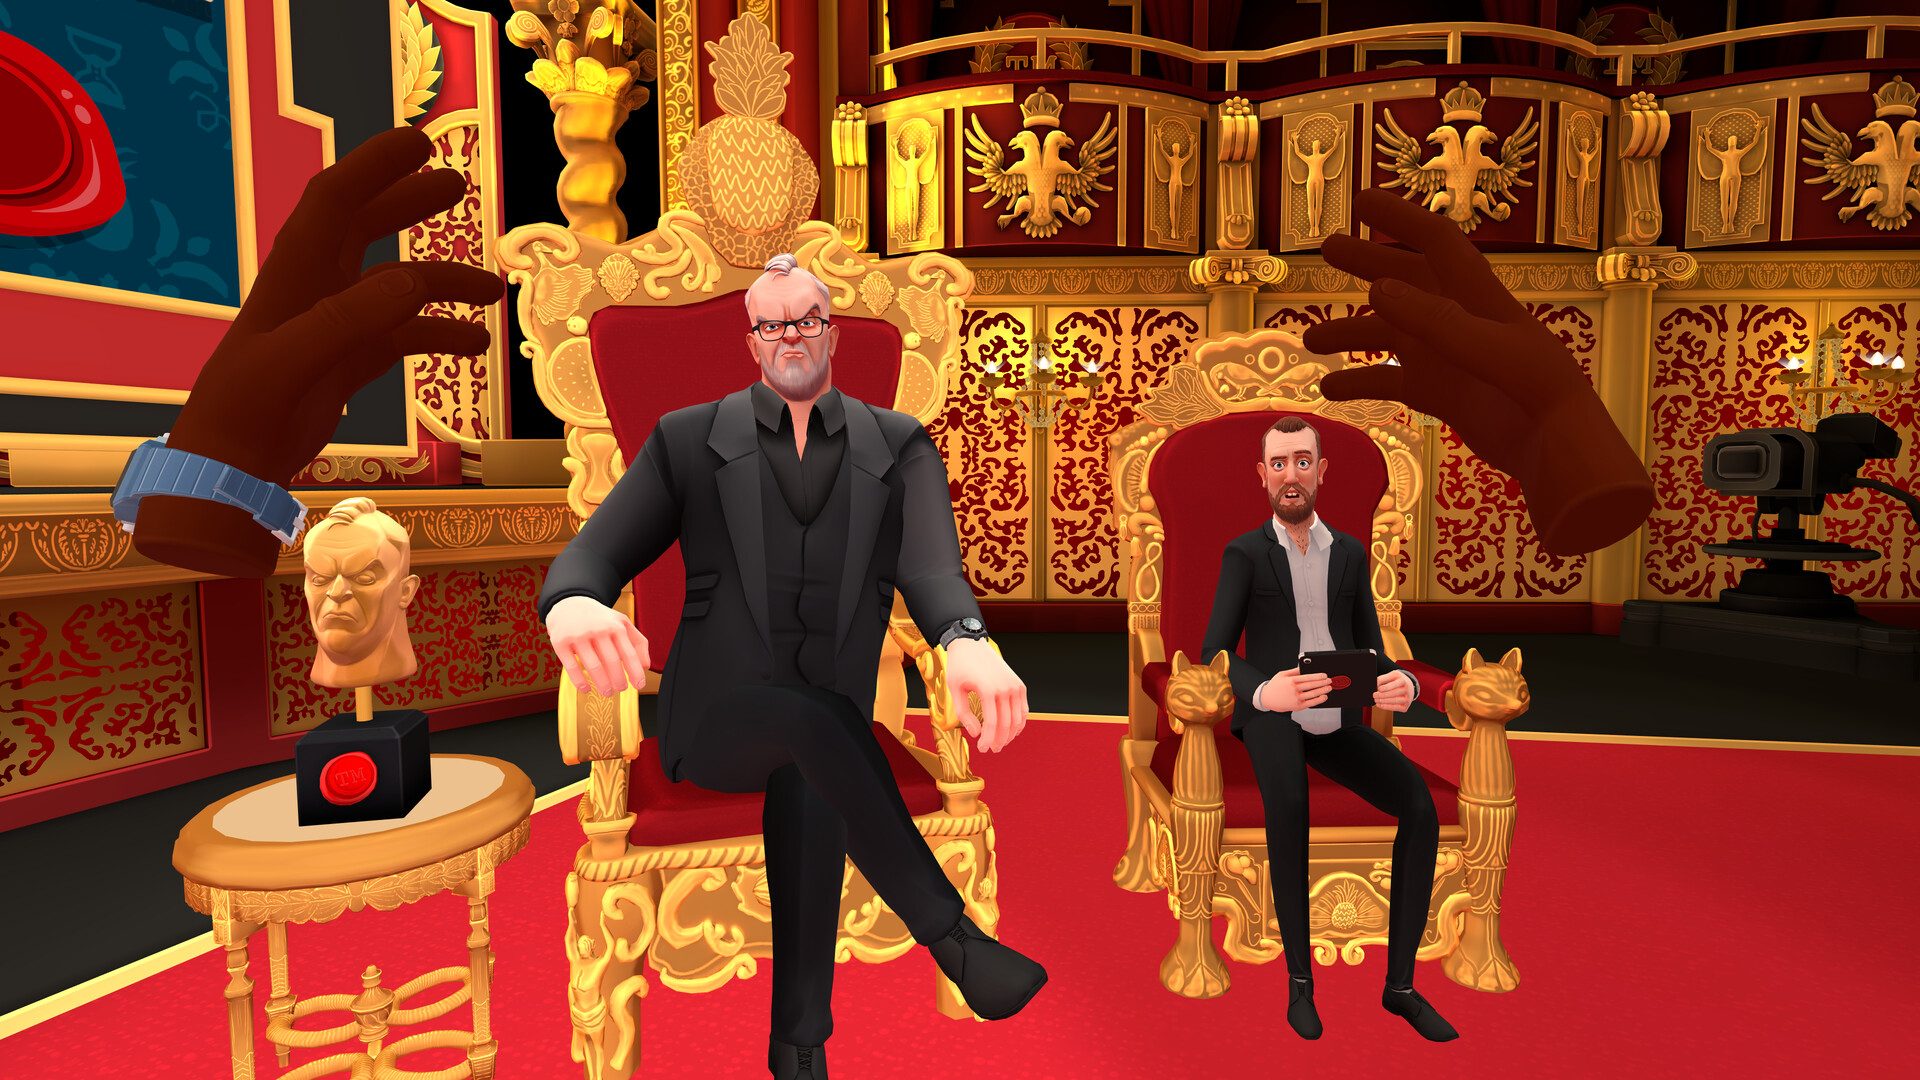 Taskmaster is Getting a VR Game, Coming to Quest & PC VR in 2024